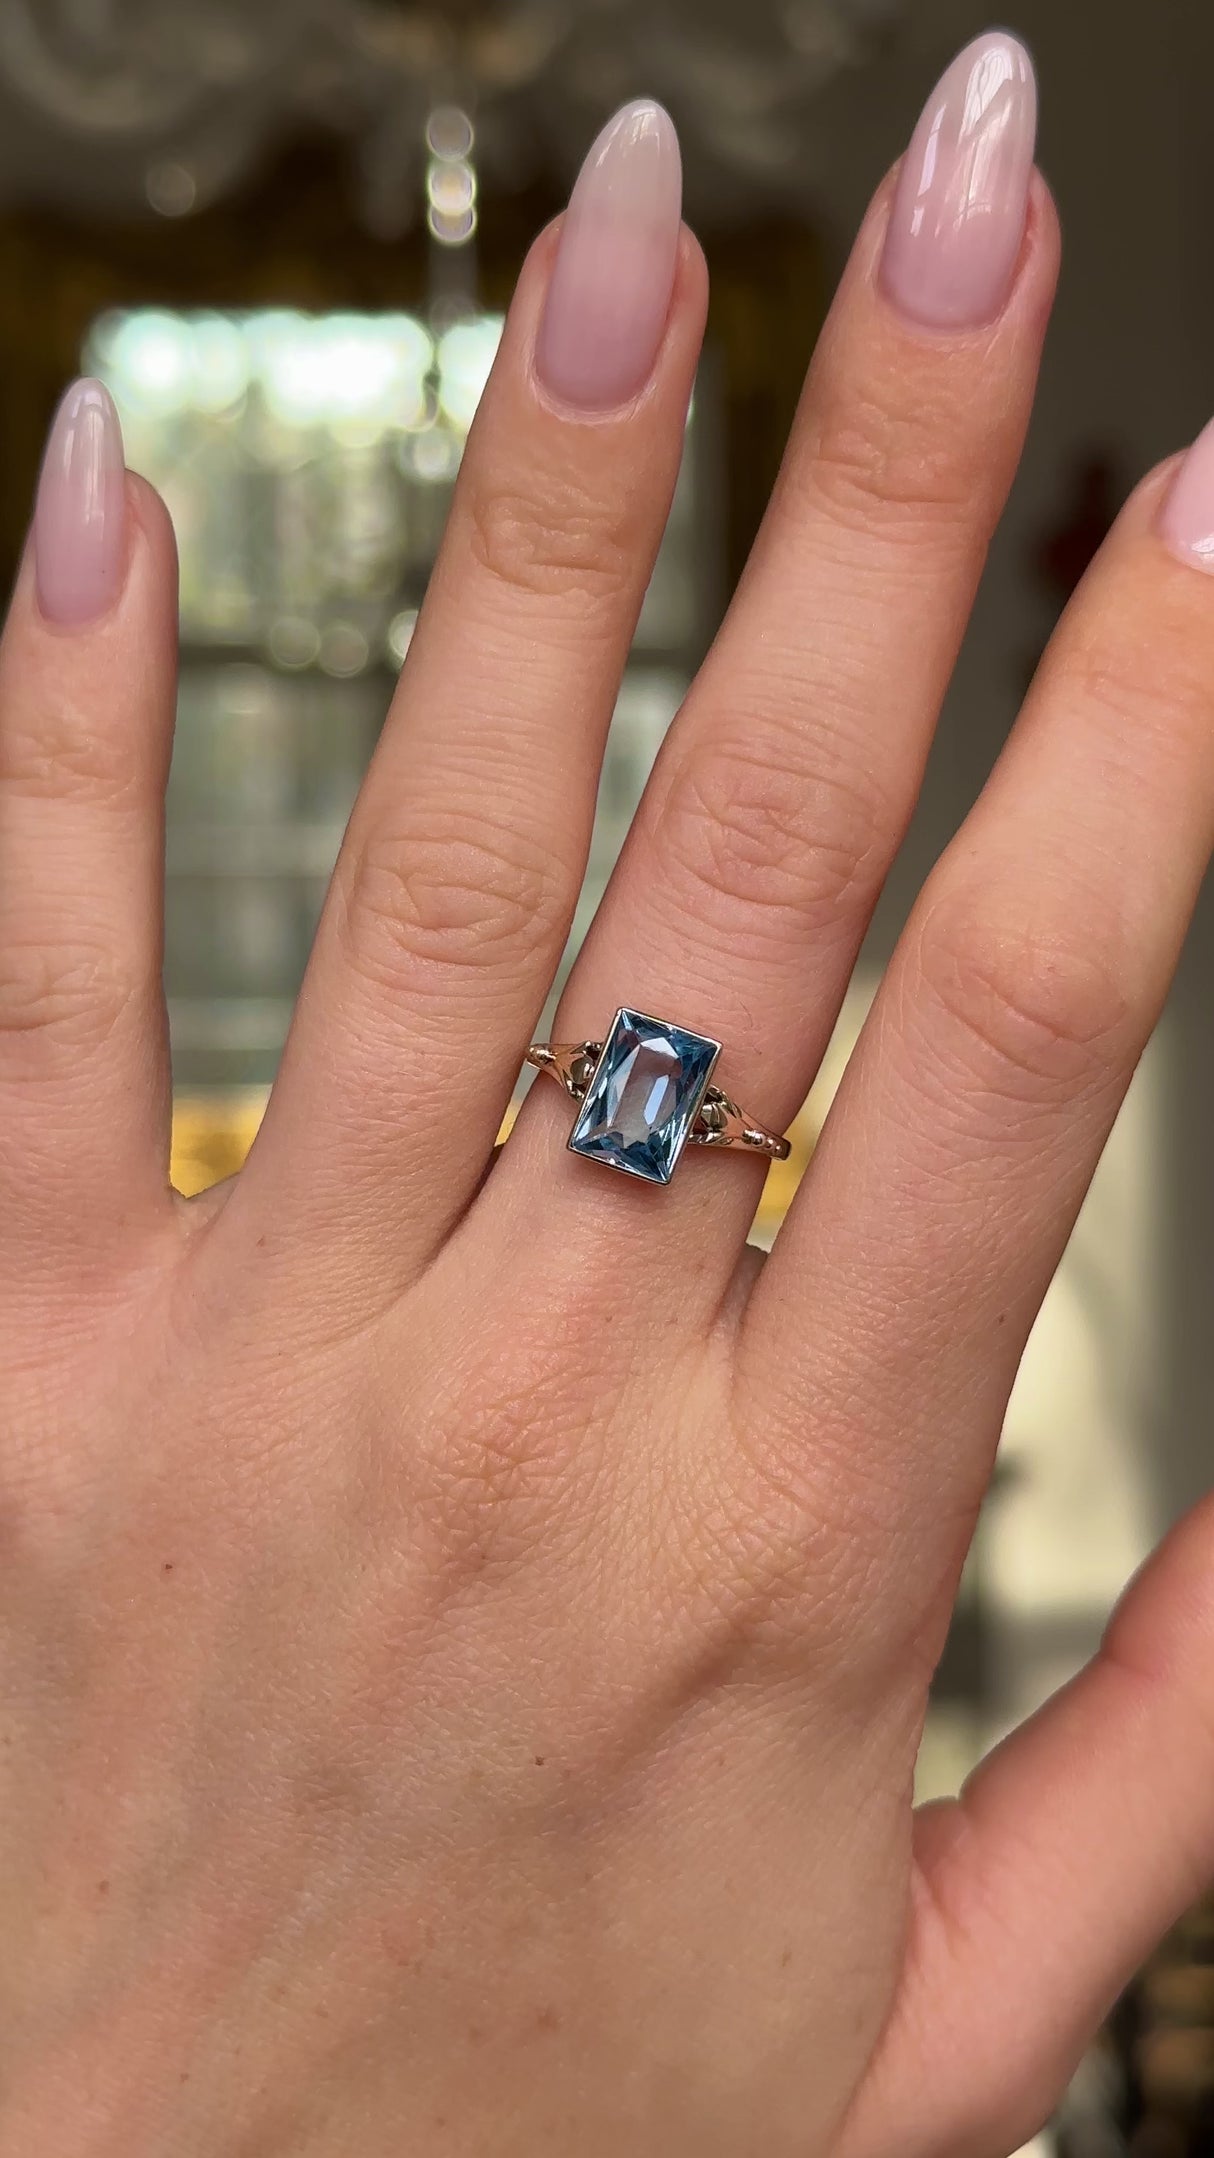 antique aquamarine single stone ring worn on hand and moved around to give perspective. 